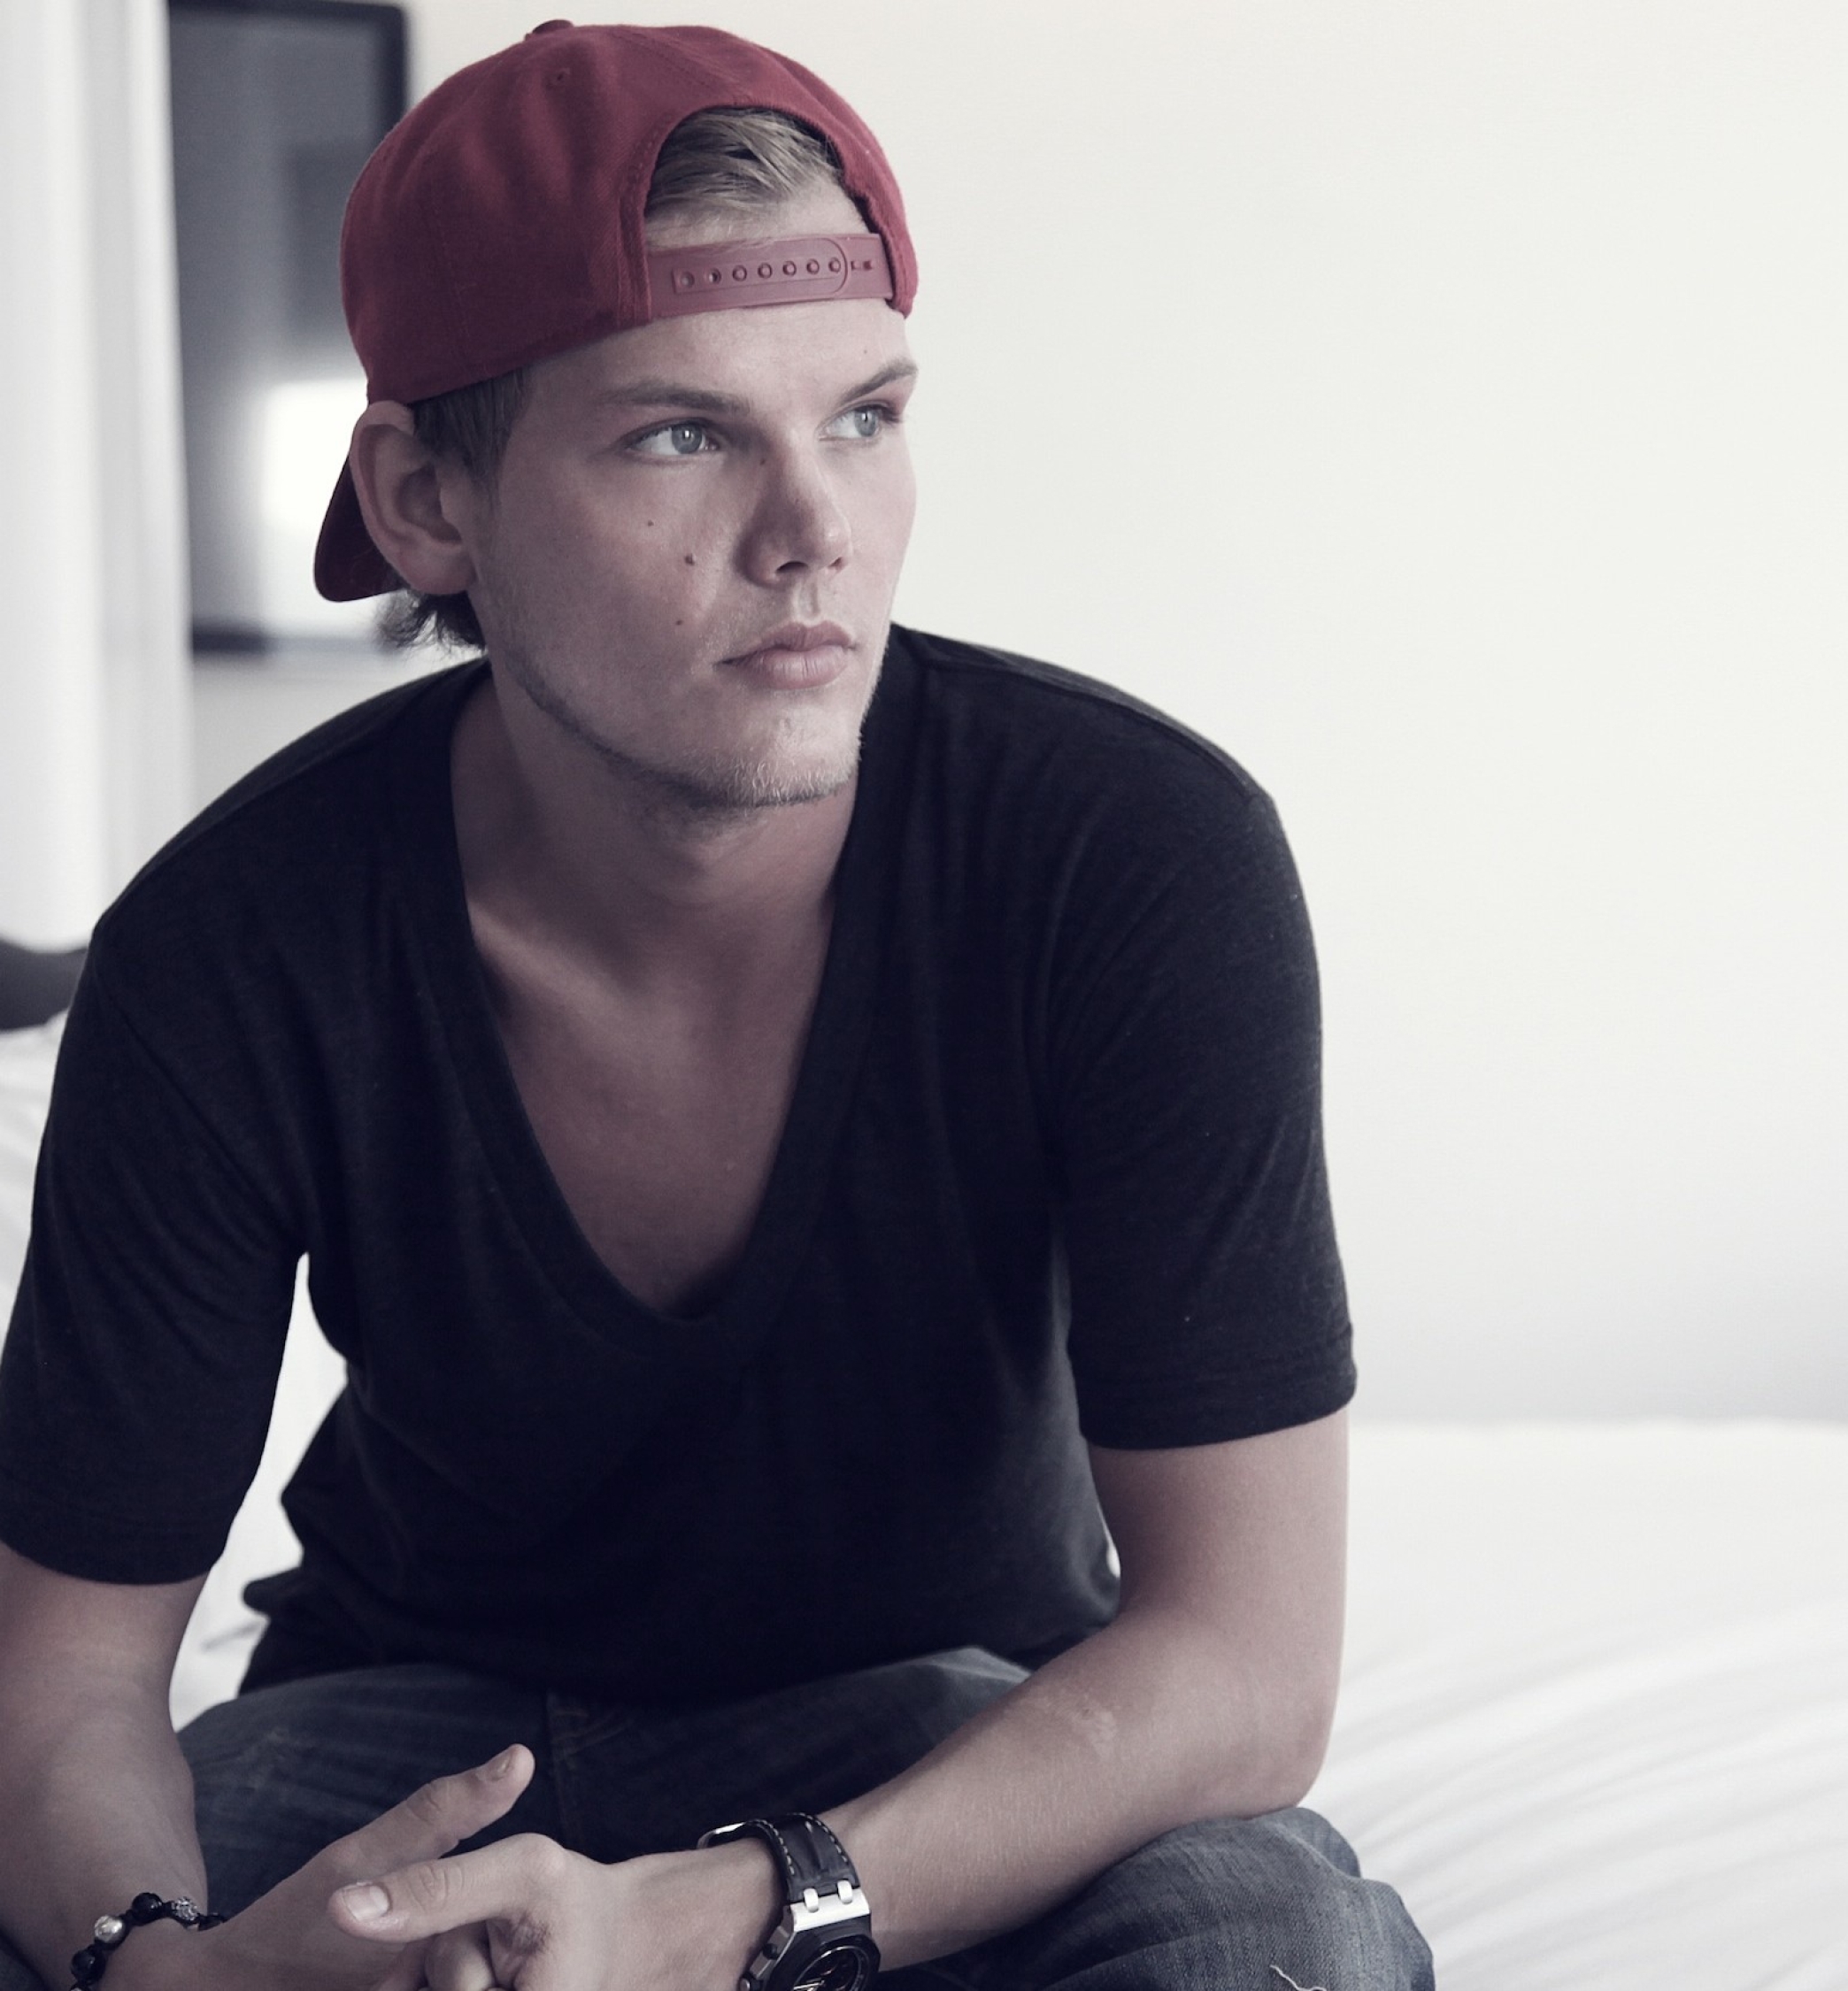 x2250 Tim Bergling Avicii Musician x2250 Resolution Wallpaper Hd Music 4k Wallpapers Images Photos And Background Wallpapers Den